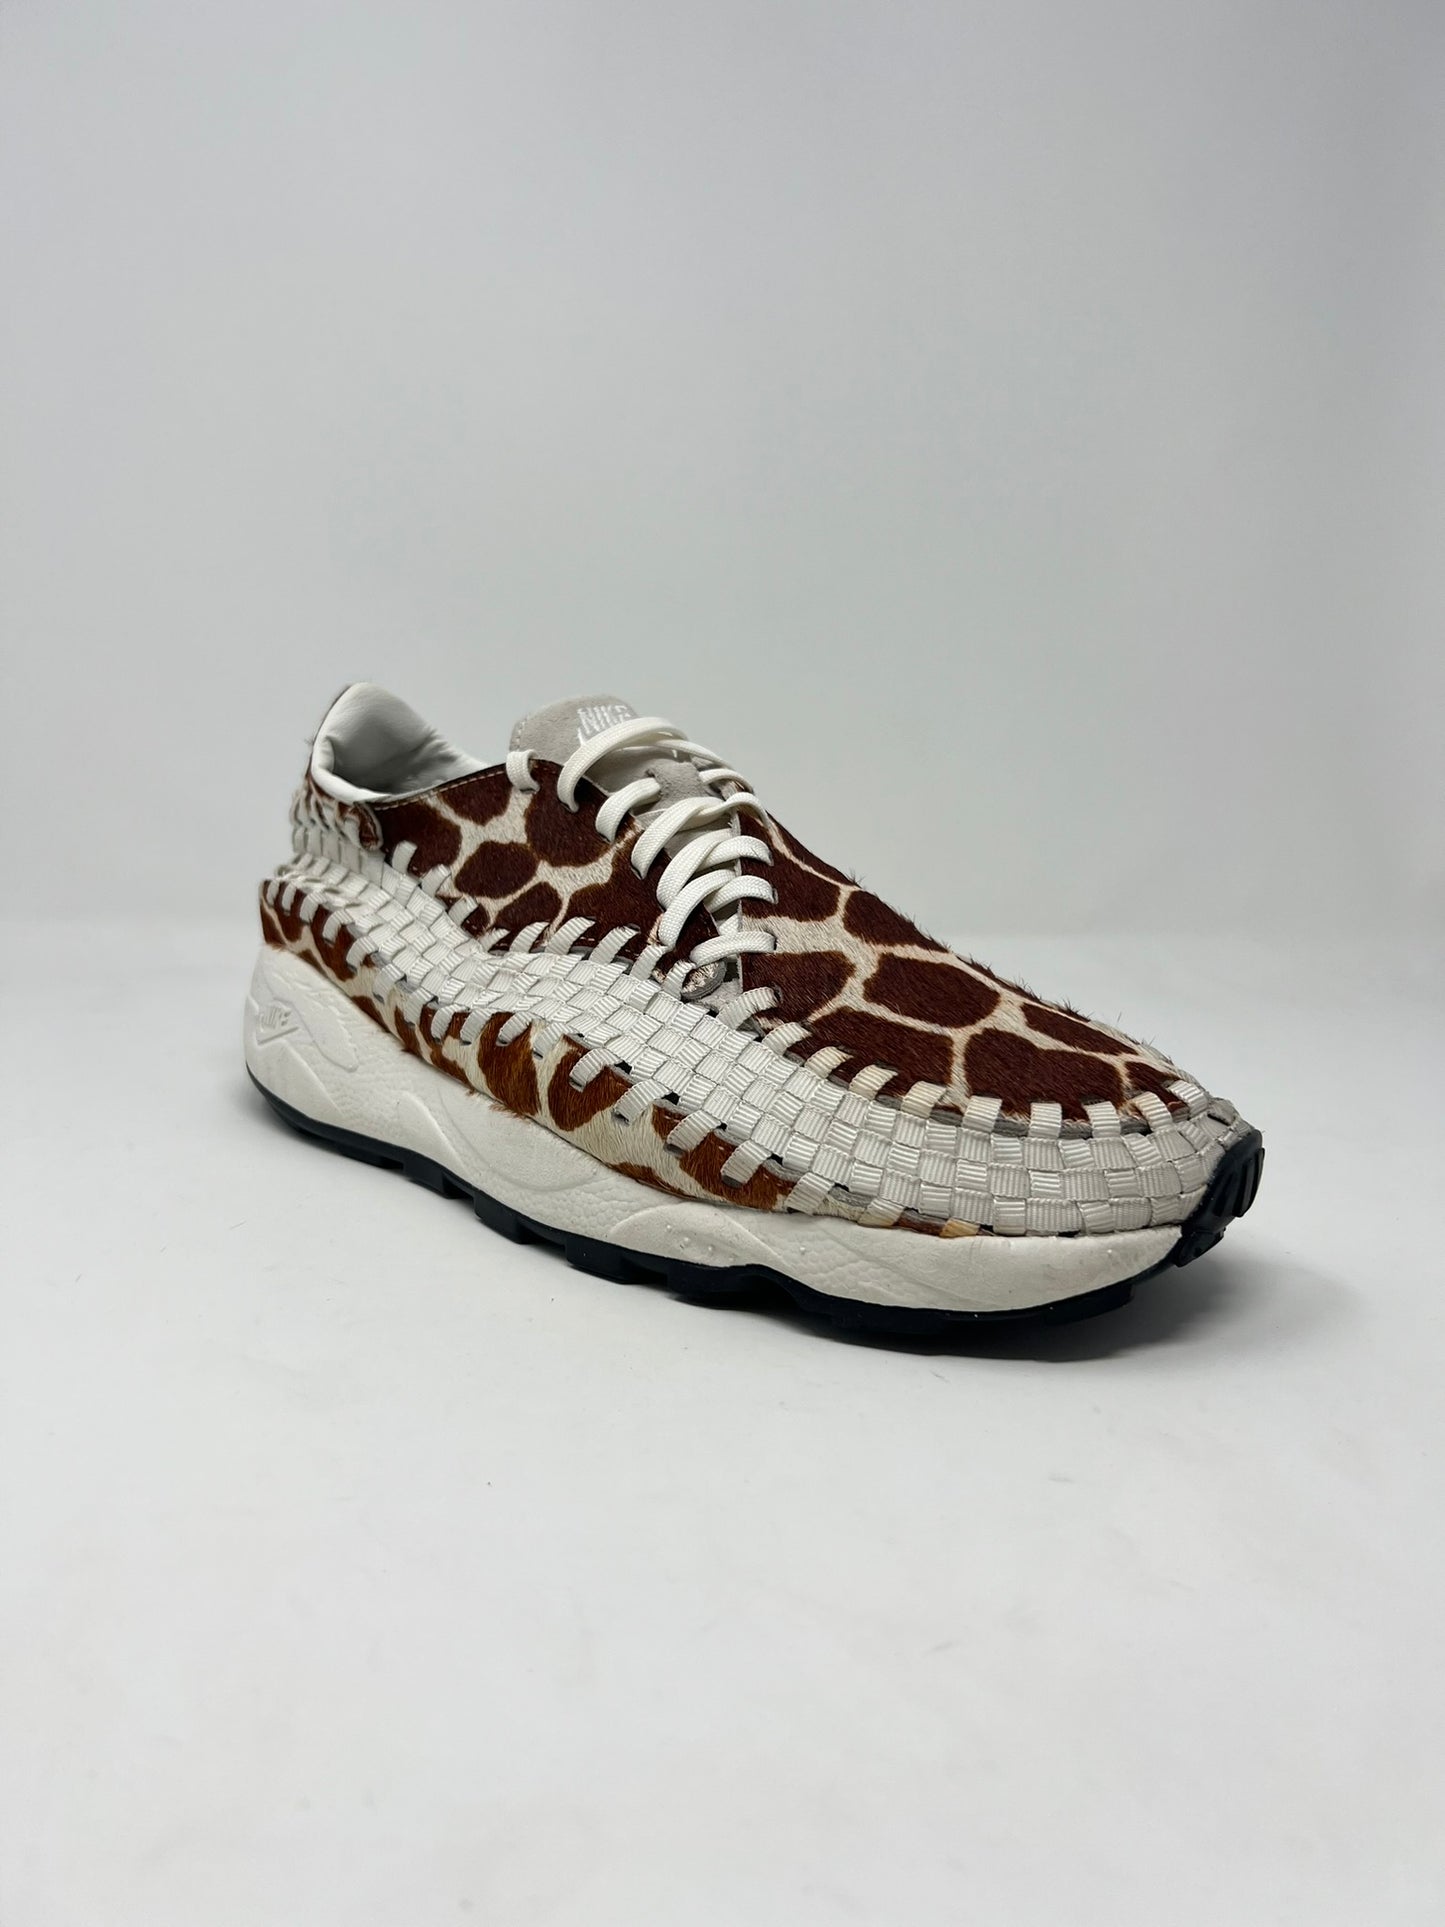 Nike Air Footscape Woven Cow Print UK9